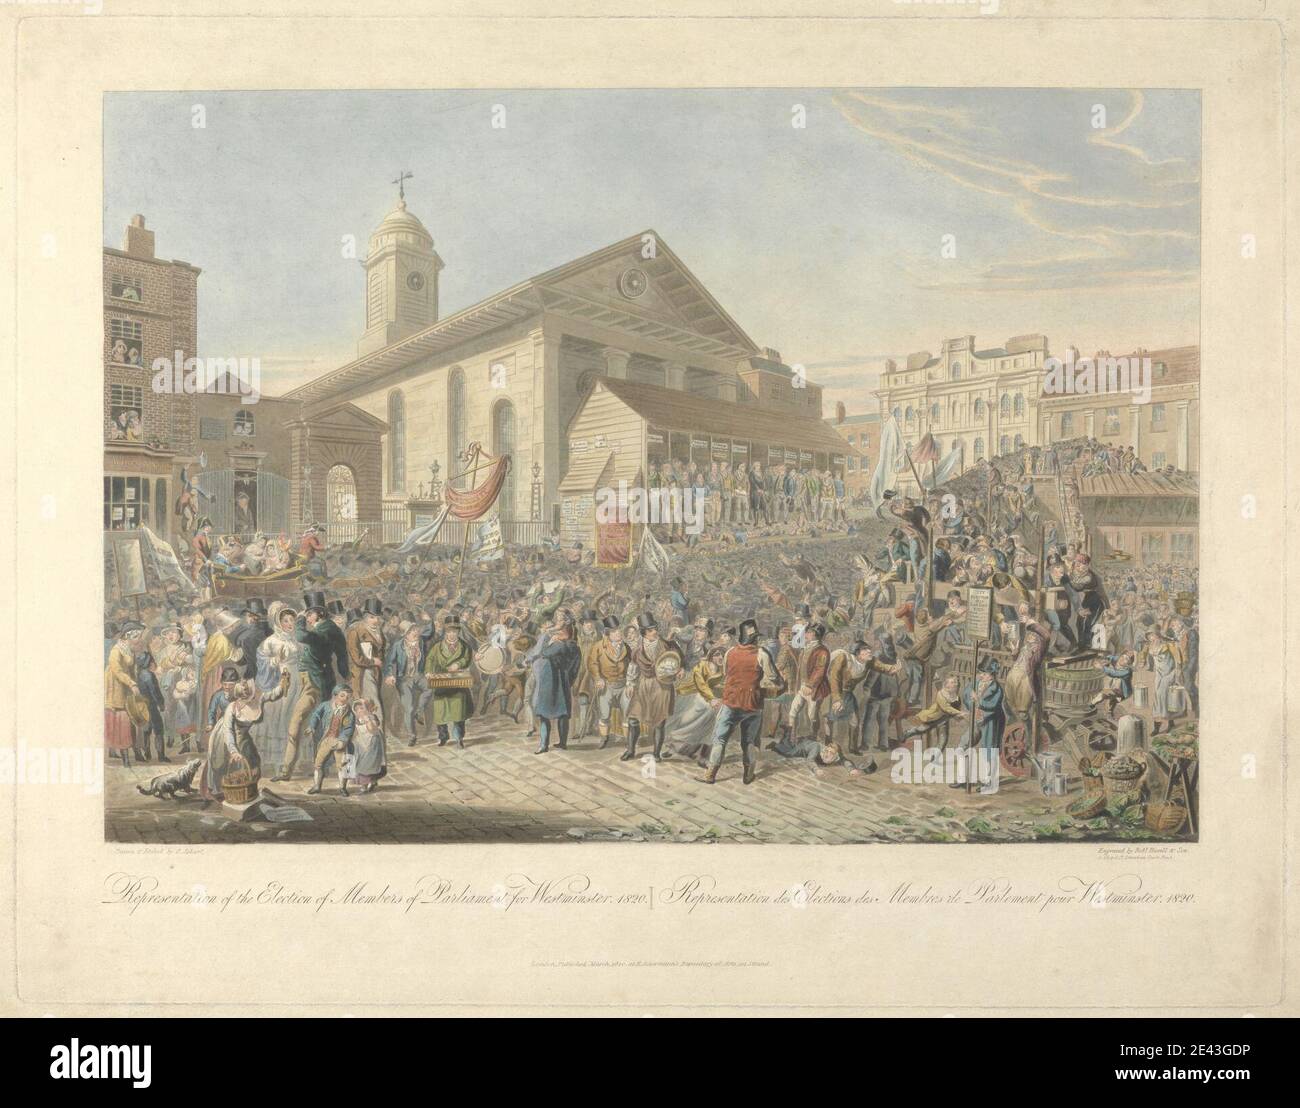 Robert Havell, 1769â€“1832, British, Representation of the Election of Members of Parliament for Westminster 1820, 1820. Aquatint, hand-colored. Stock Photo